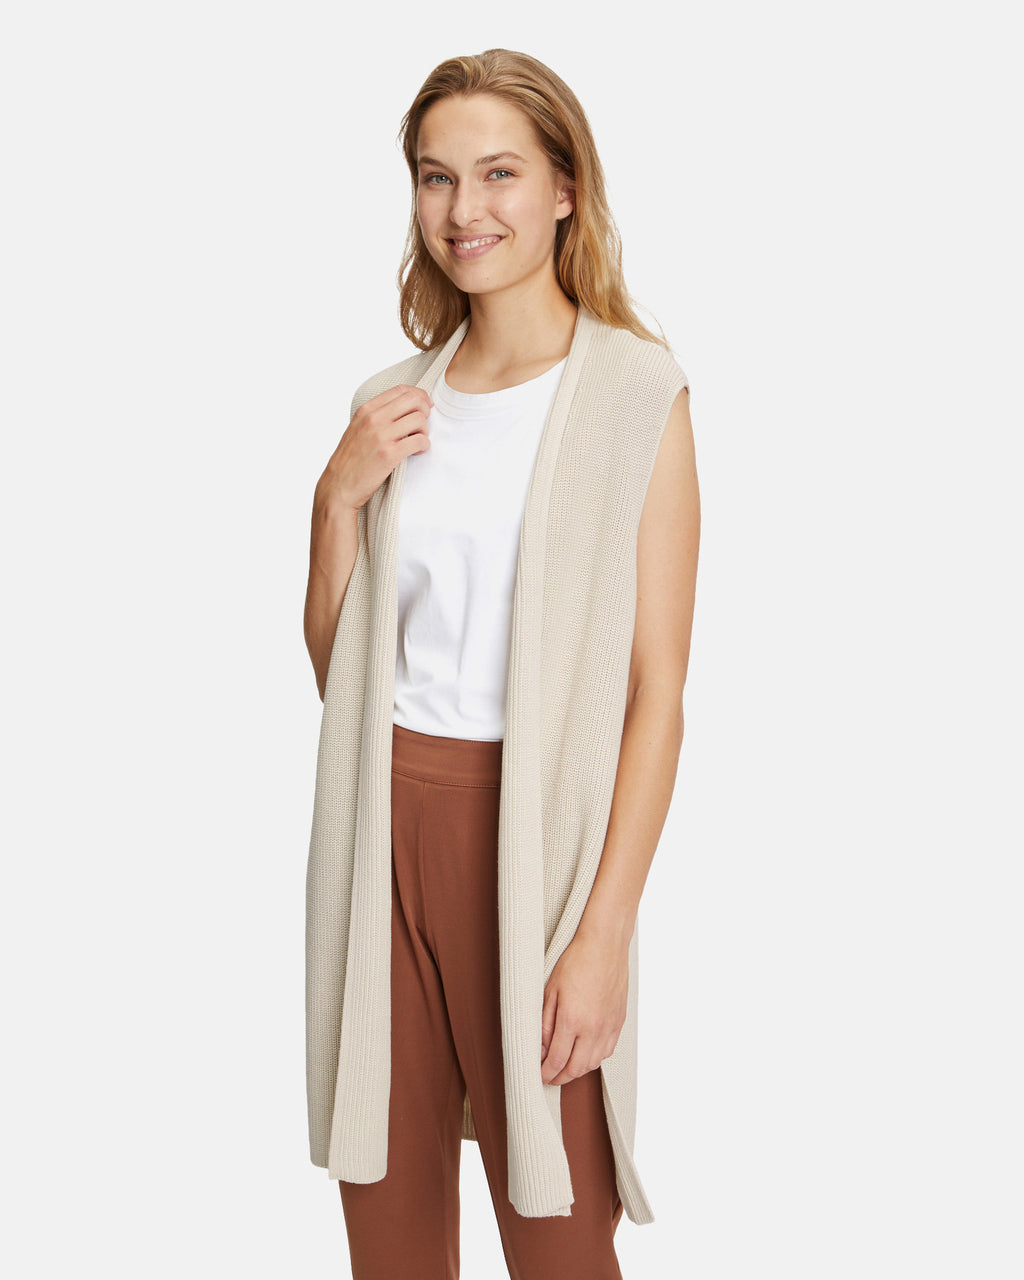 Beige Cardigan With Knit Details